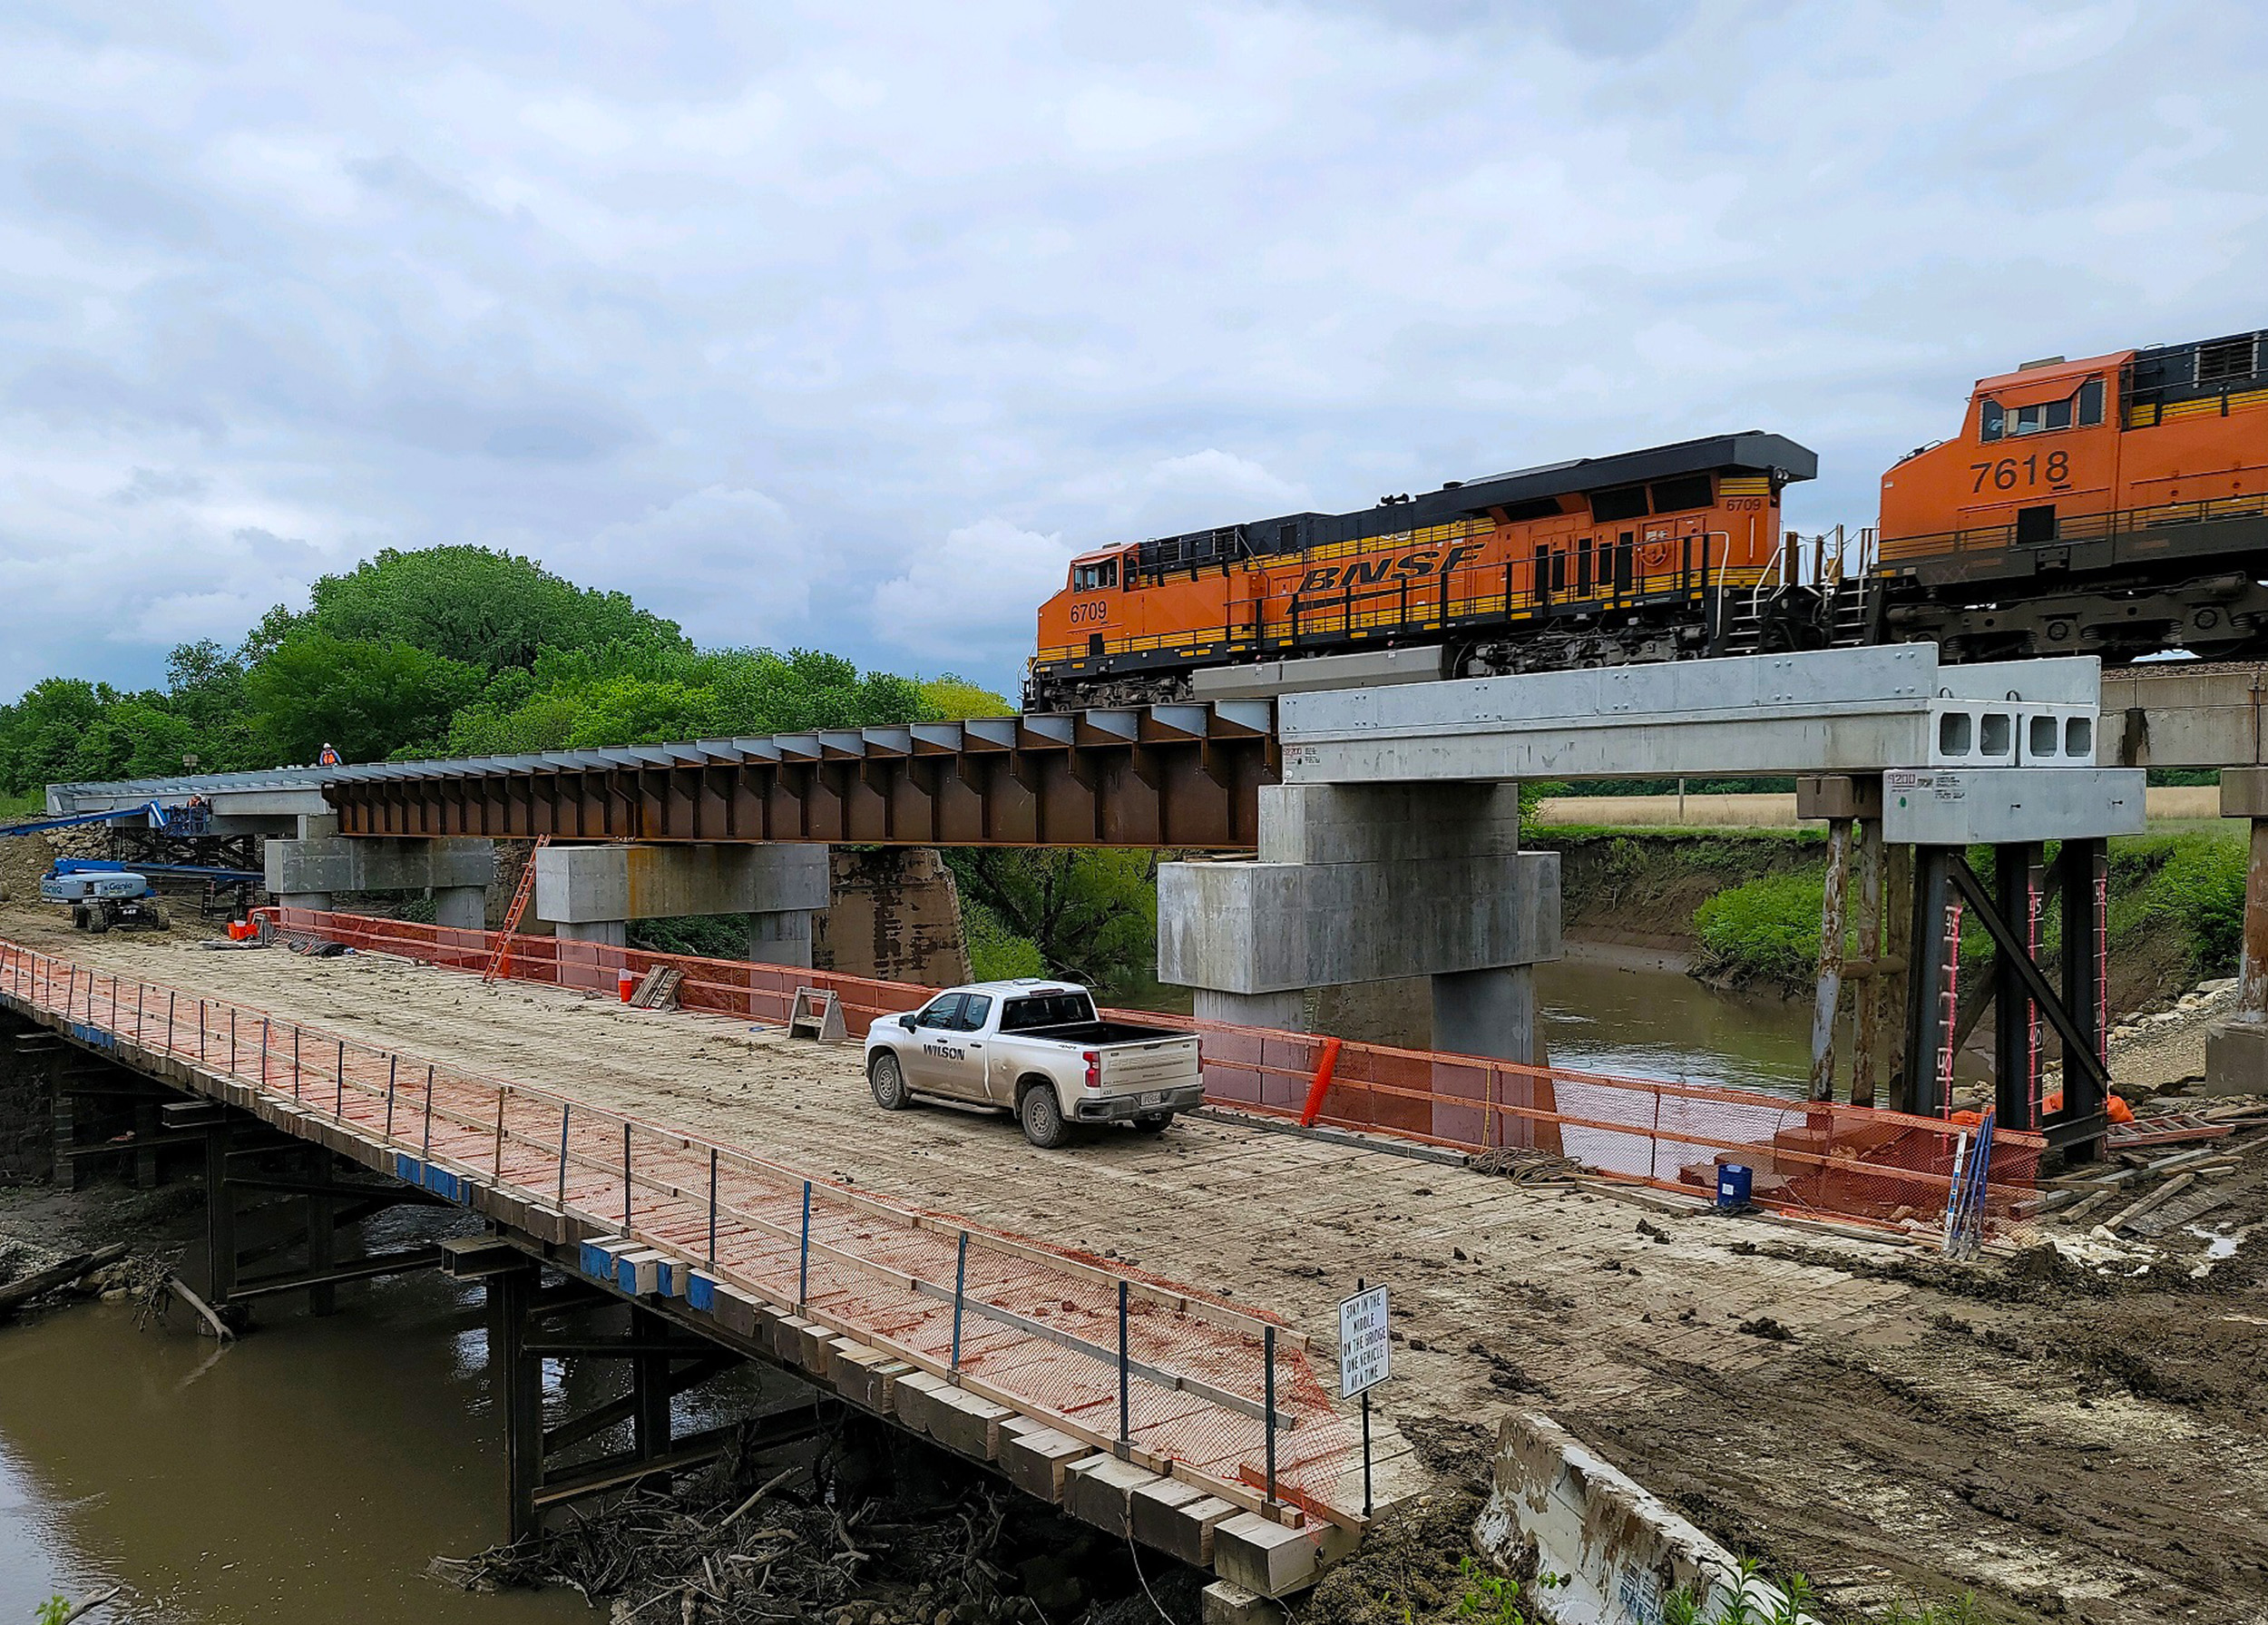 Wilson & Company provided construction management, quality assurance, and survey services on the BNSF Emporia CMGC Project.